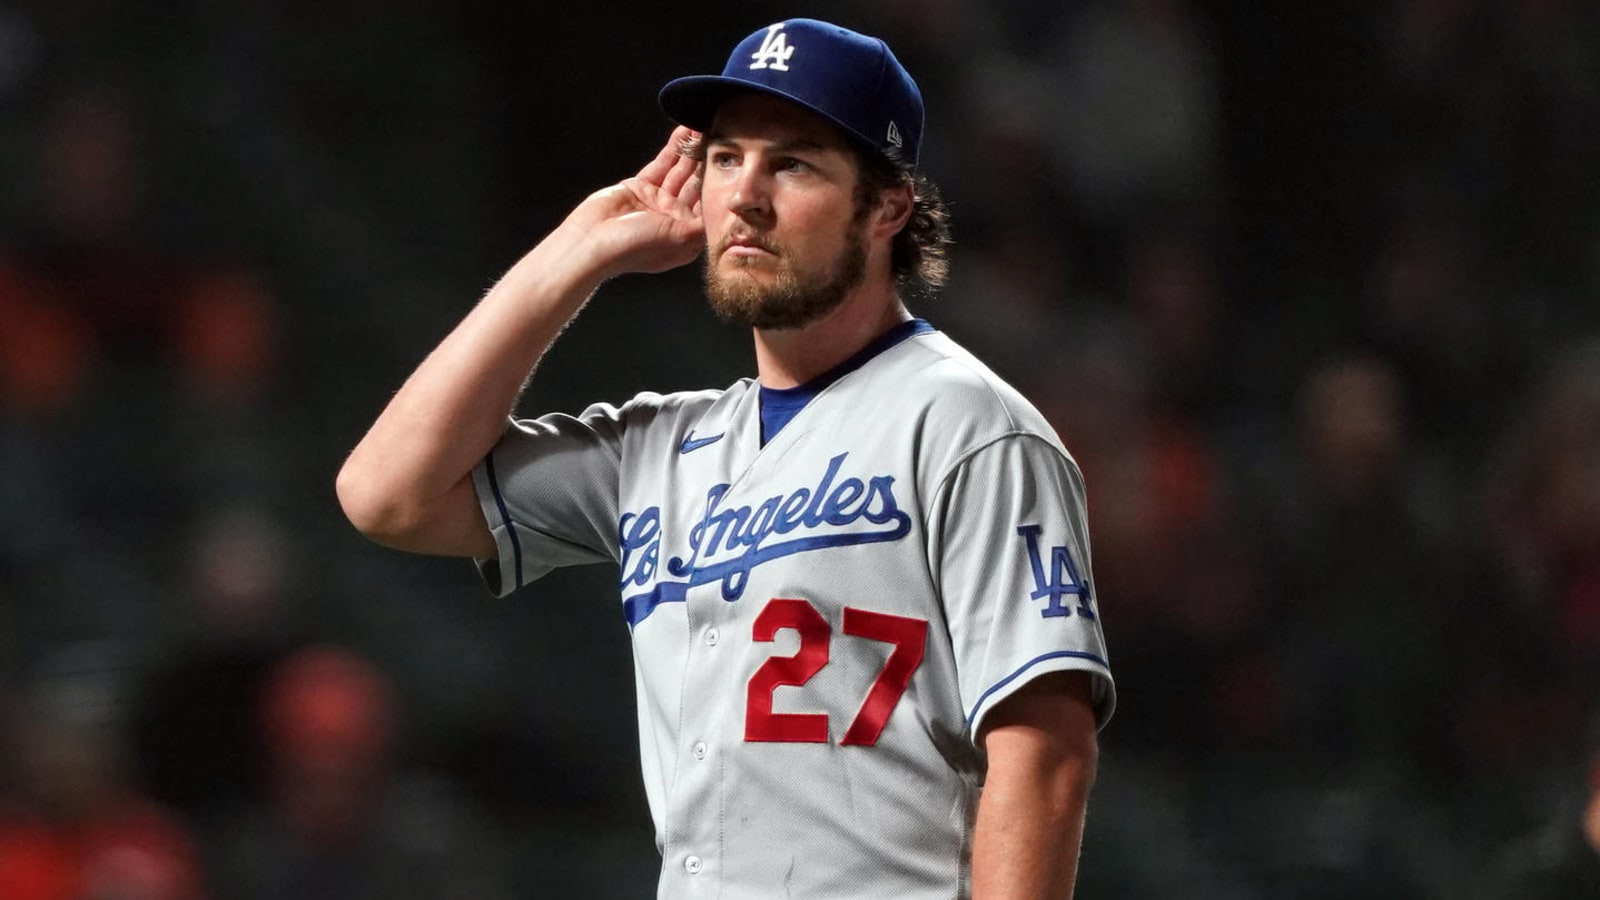 Dodgers pitcher Trevor Bauer feeds off booing Giants fans, riles up crowd in win